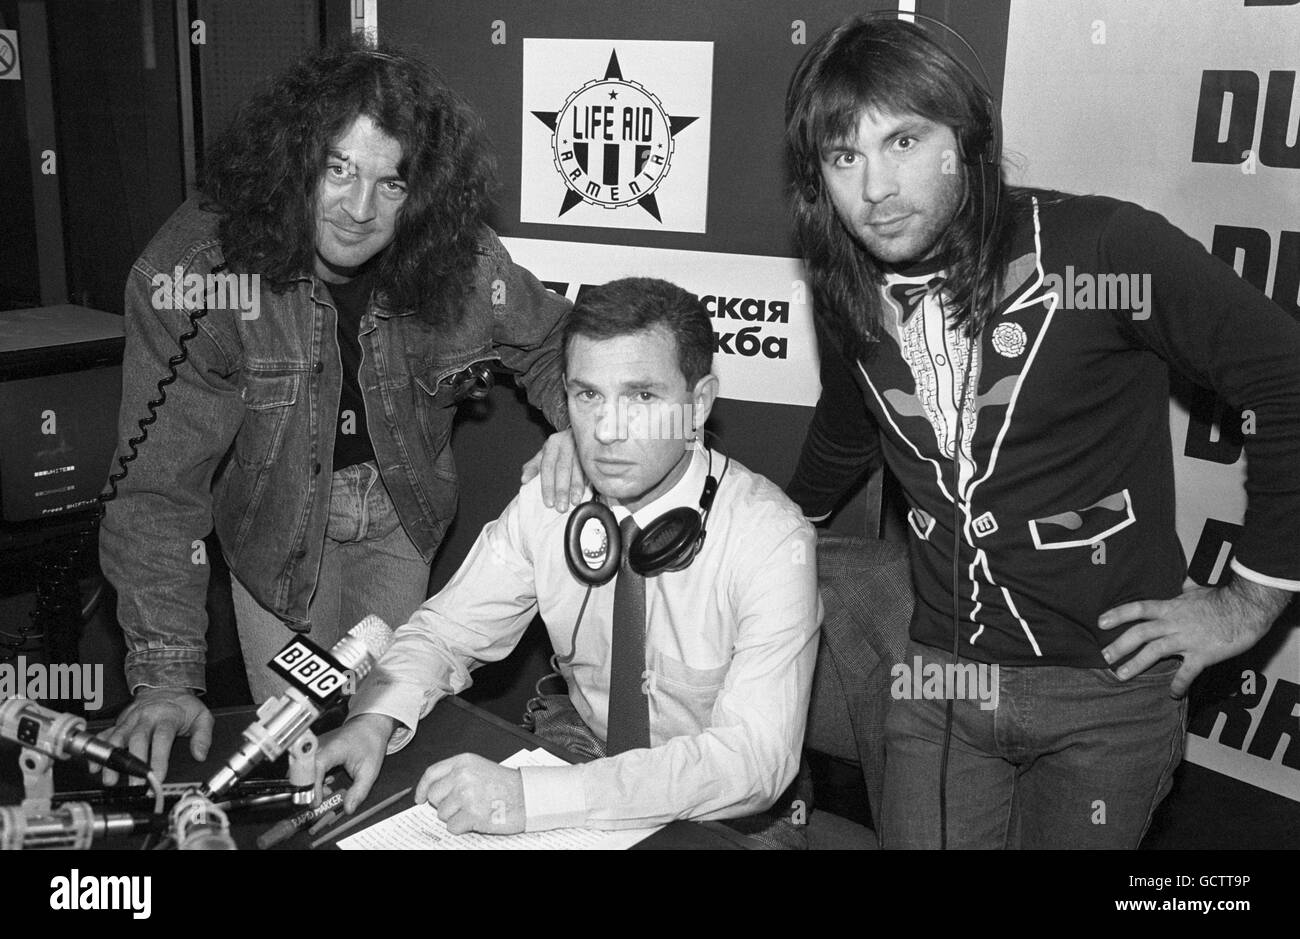 Heavy metal rock stars Ian Gillan, left, (formerly of Deep Purple) and Bruce Dickinson, right, of Iron Maiden, with disc jockey Sam Yossman, centre, at the BBC Studios, London. The BBC's Russian Service is holding a phone-in where USSR rock fans can talk to the stars. Stock Photo